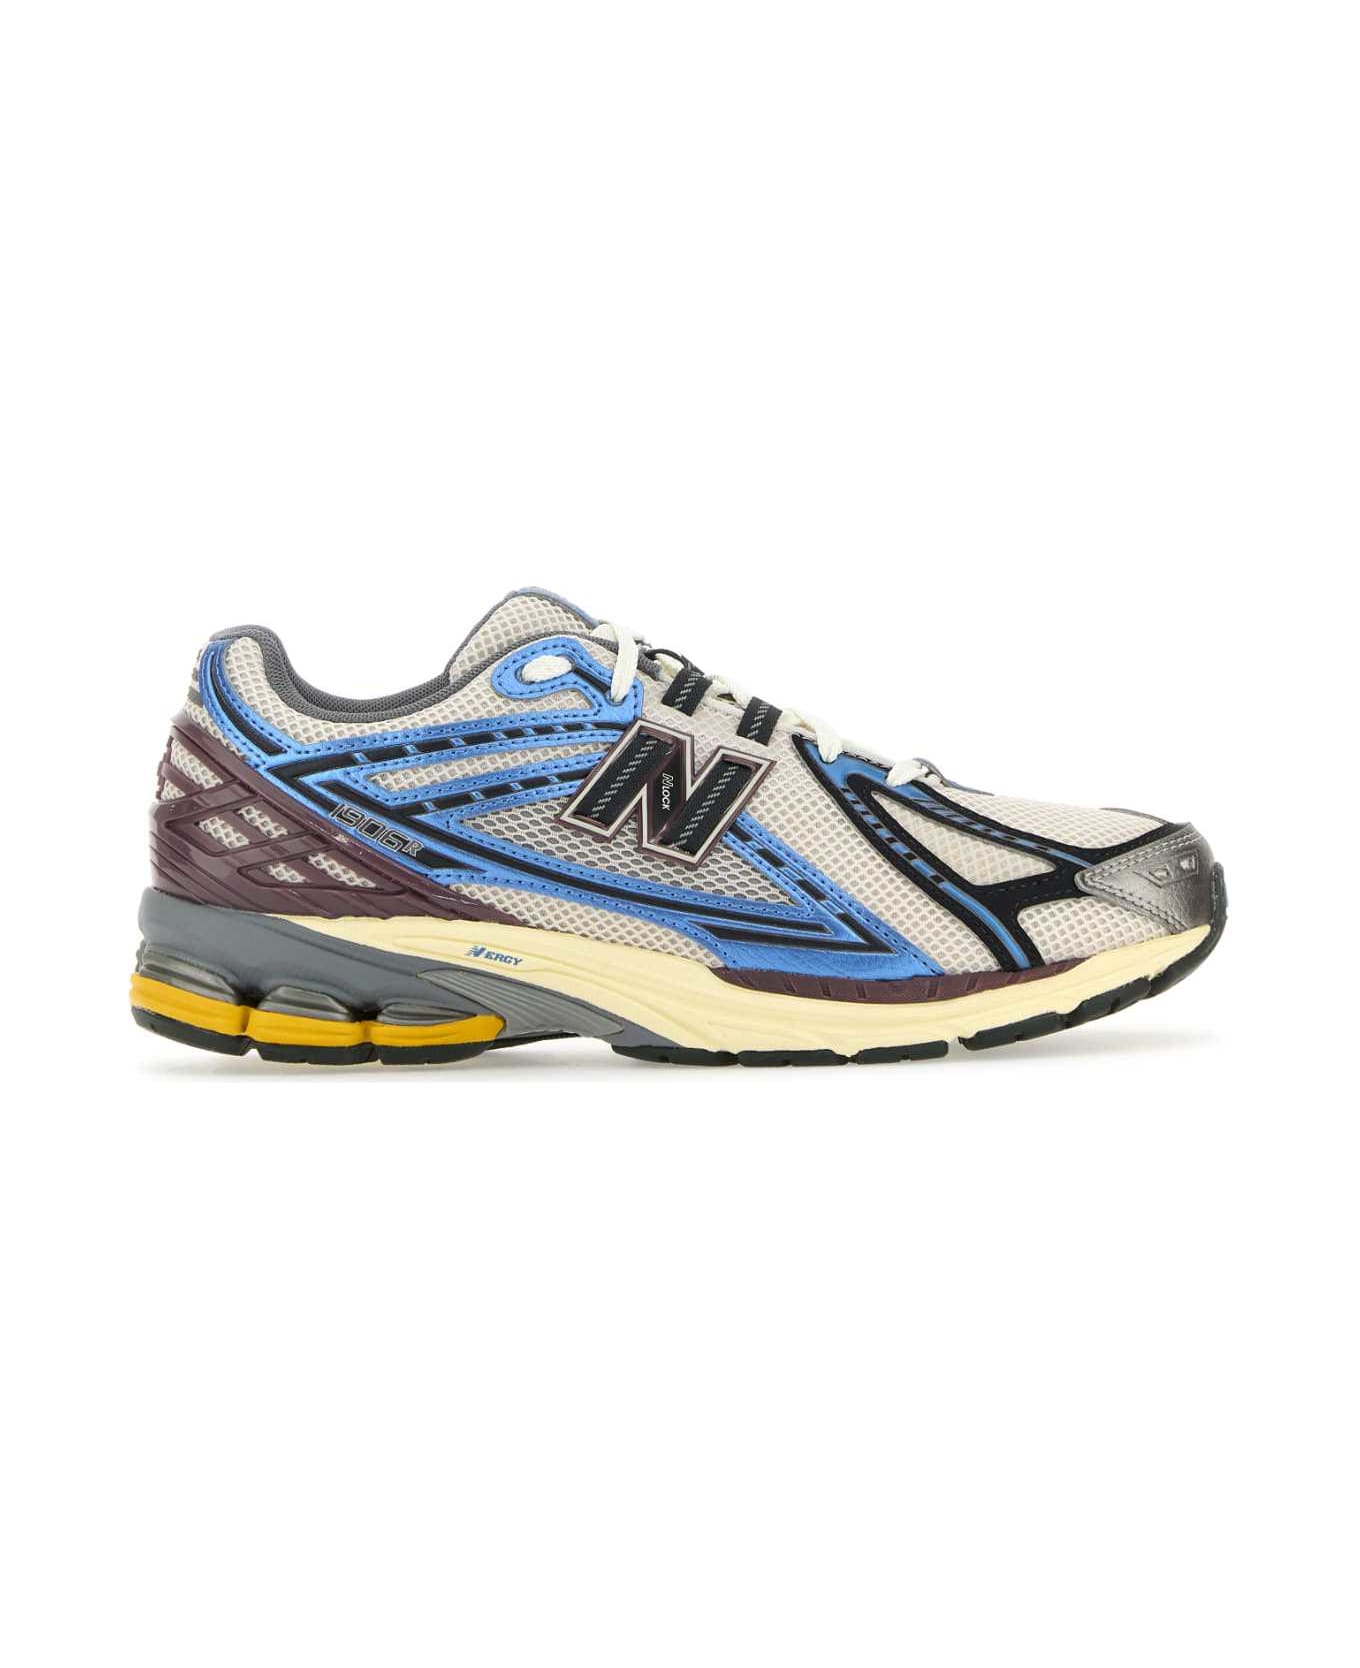 New Balance Multicolor Rubber And Mesh 1906r Sneakers - BLUE